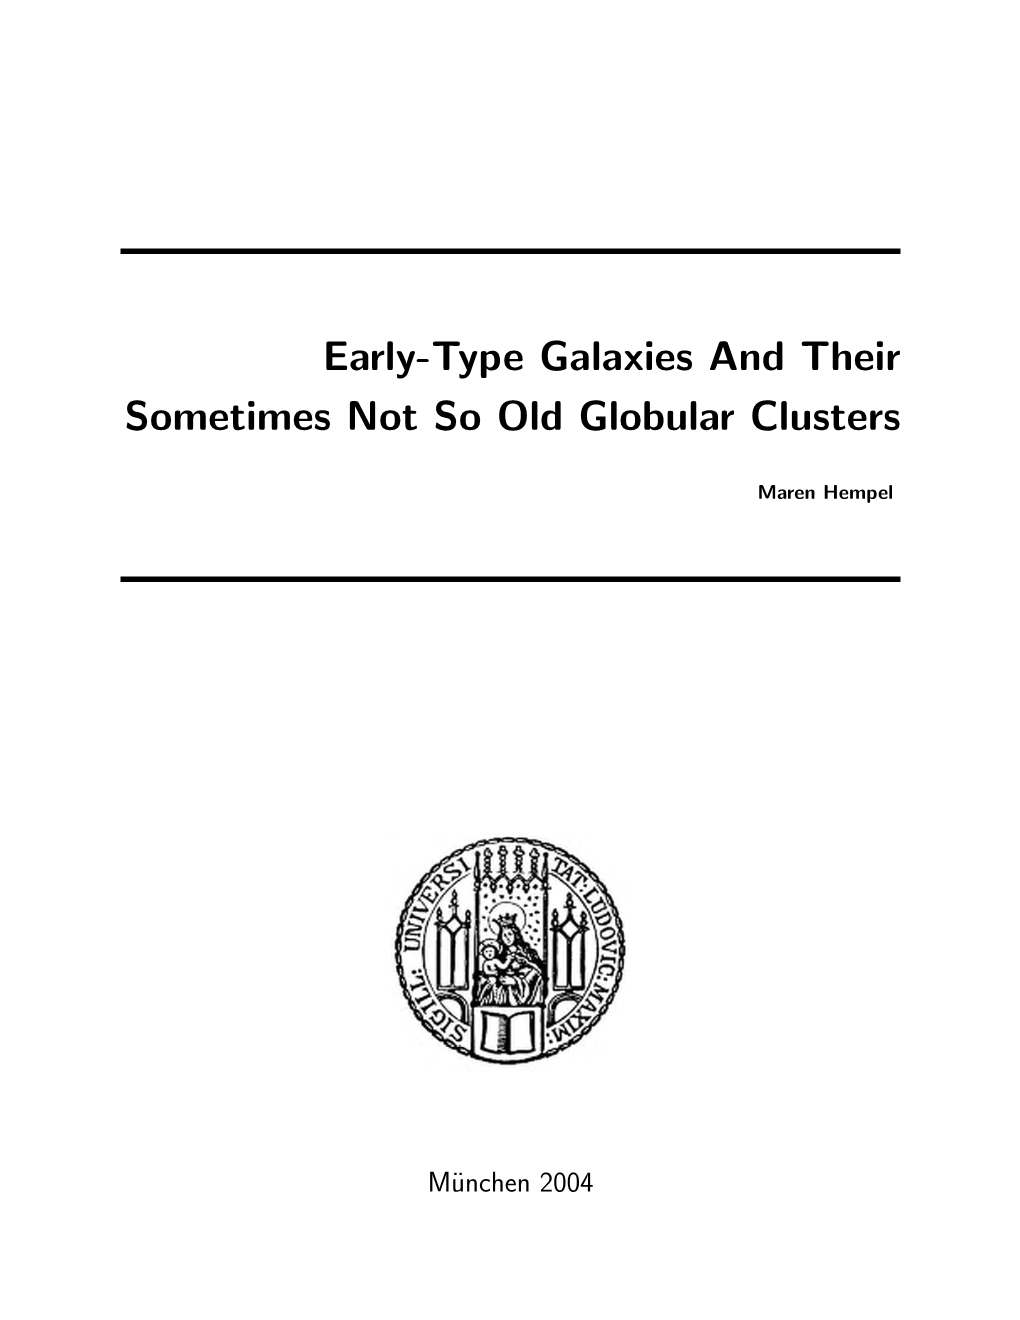 Early-Type Galaxies and Their Sometimes Not So Old Globular Clusters